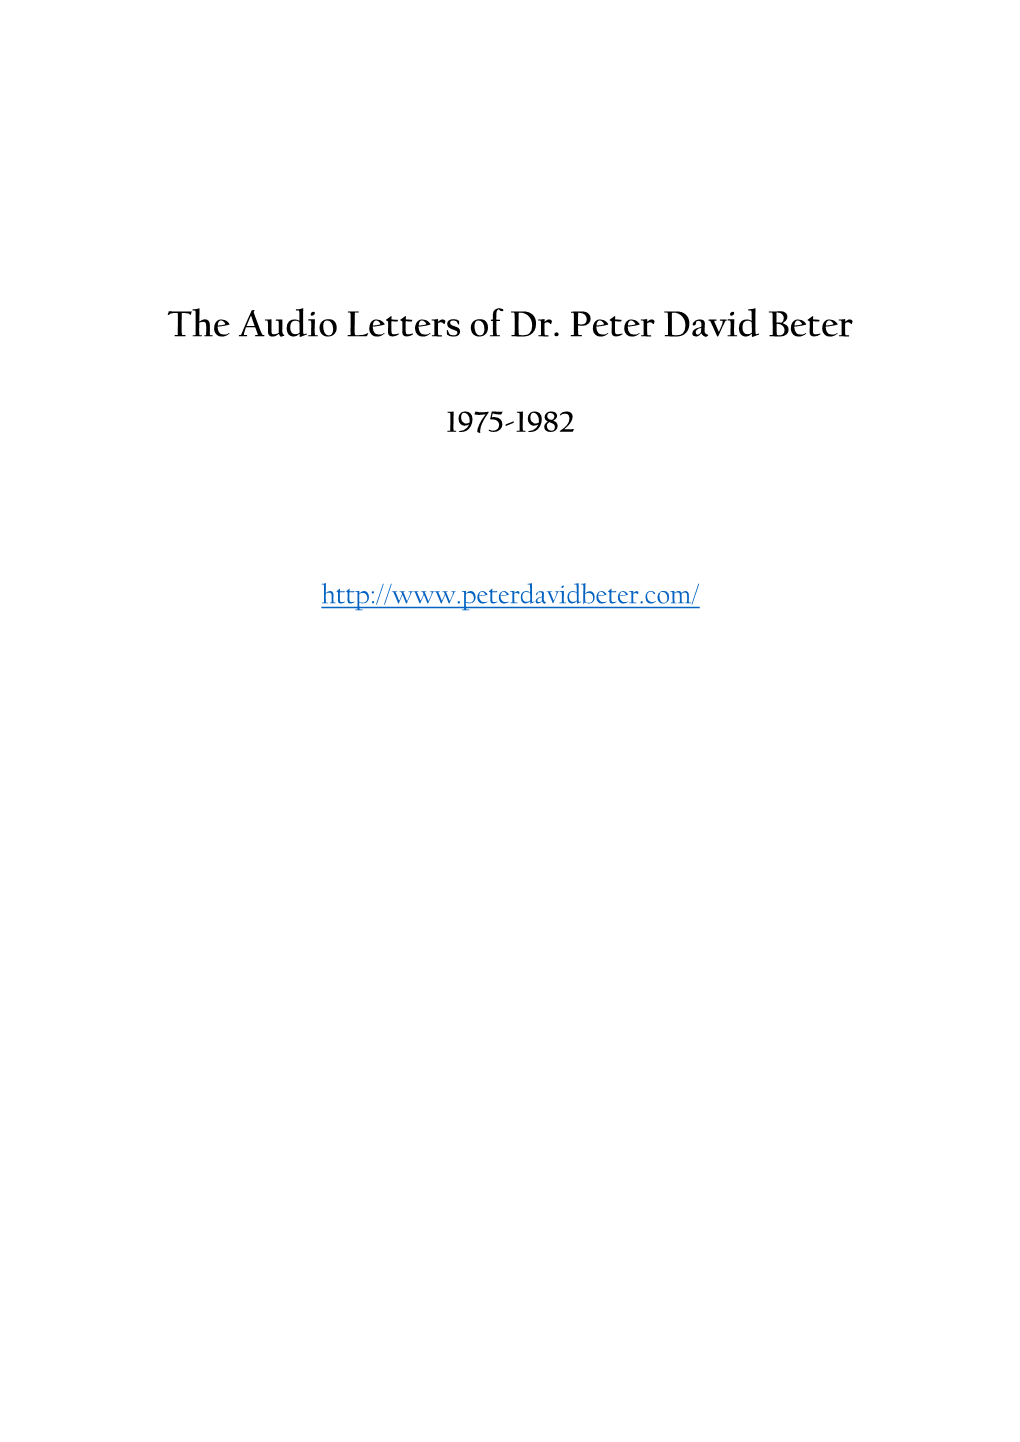 The Audio Letters of Dr. Peter David Beter